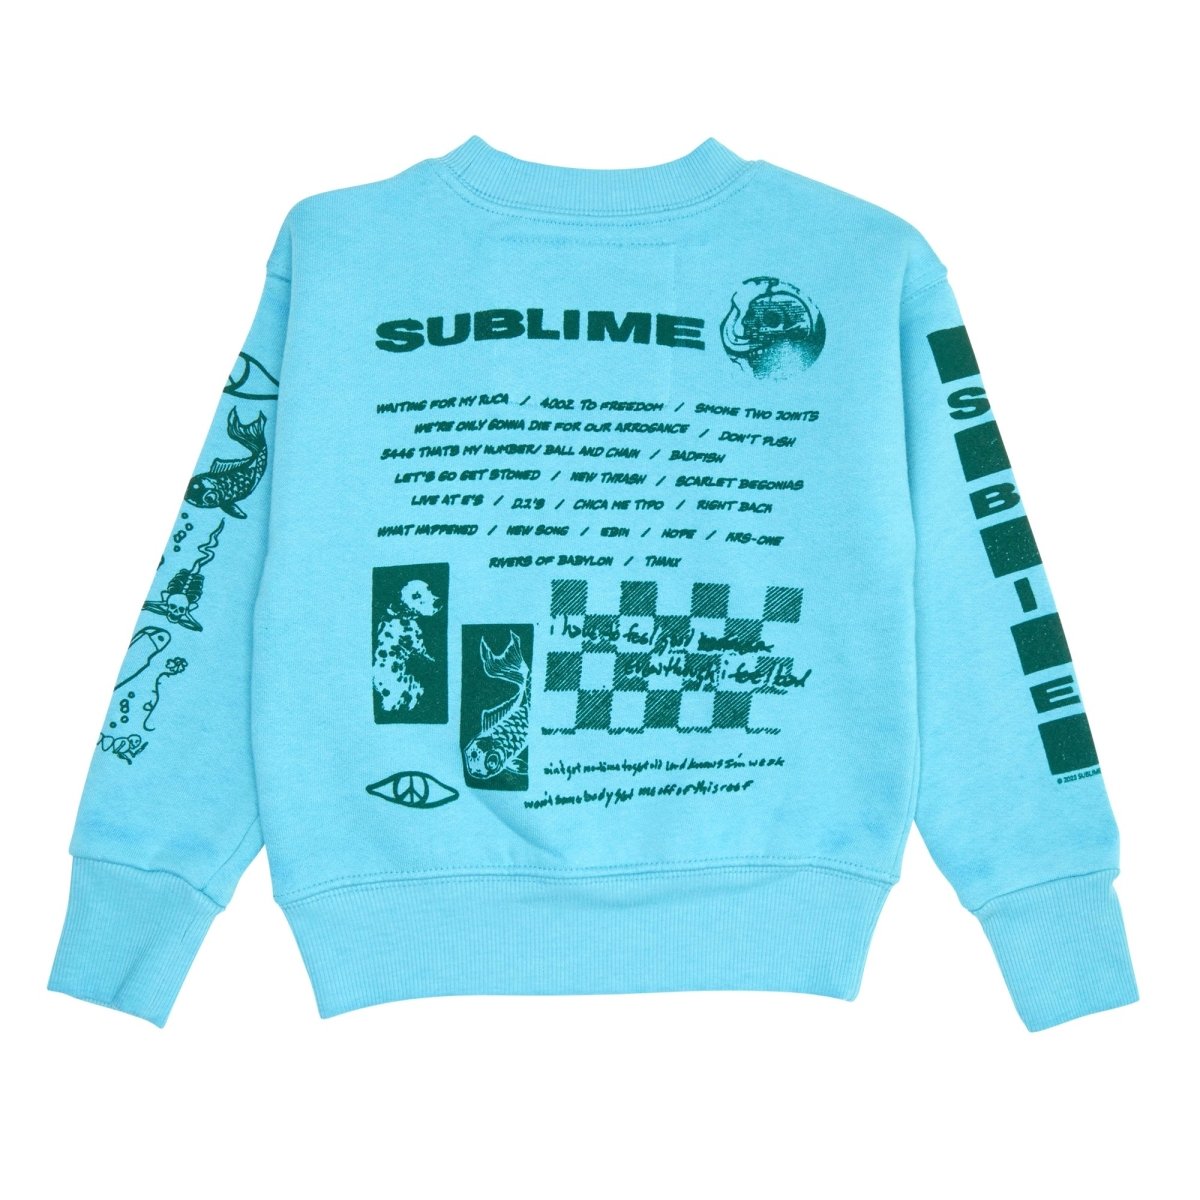 SUBLIME SWEATSHIRT - ROWDY SPROUT